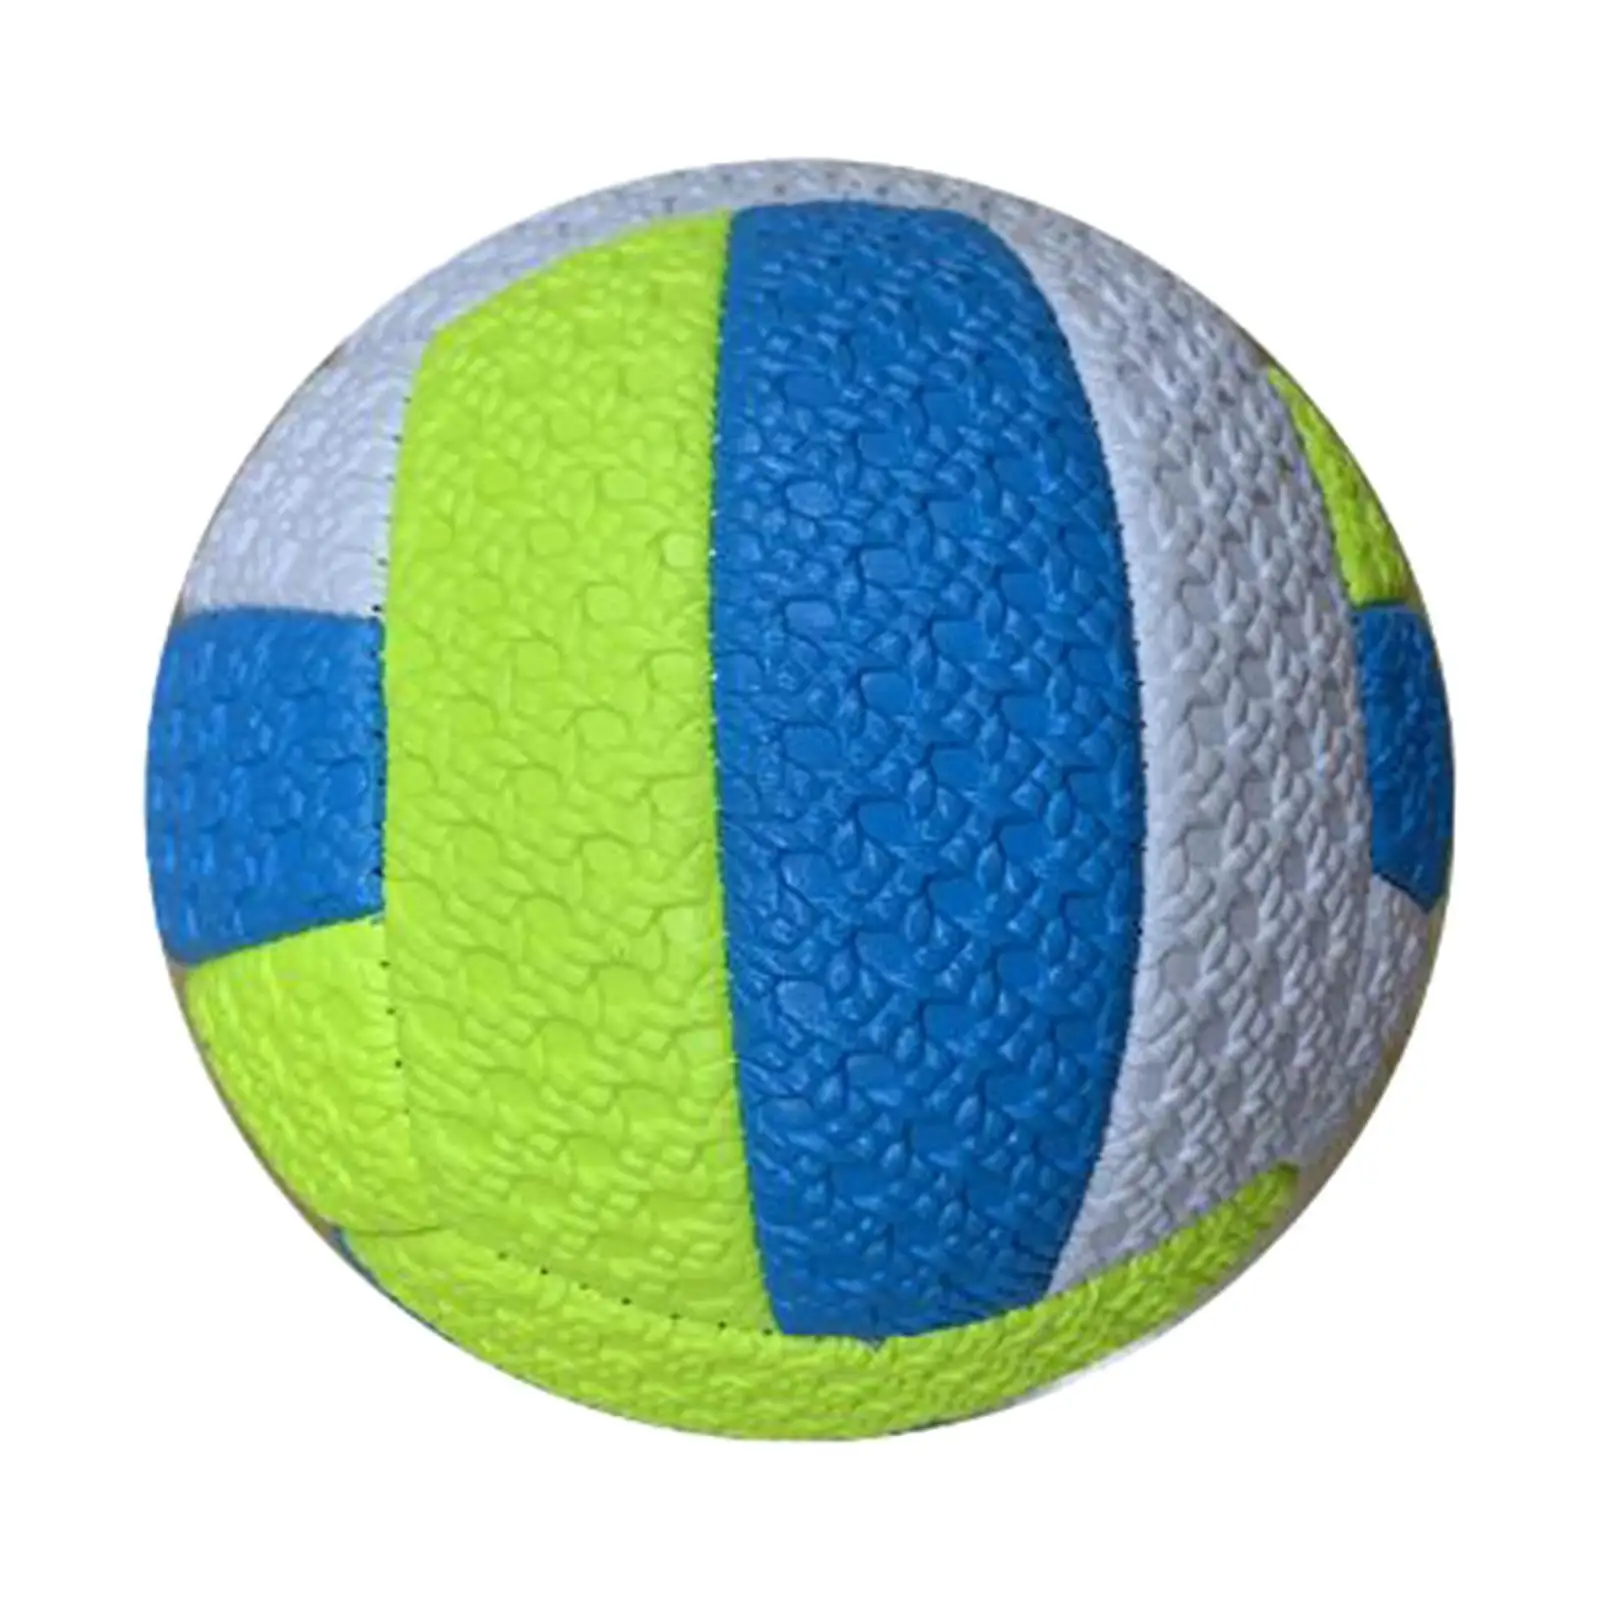 Volleyball Size 2 15cm Game Training Practice PVC Indoor Outdoor Volleyball